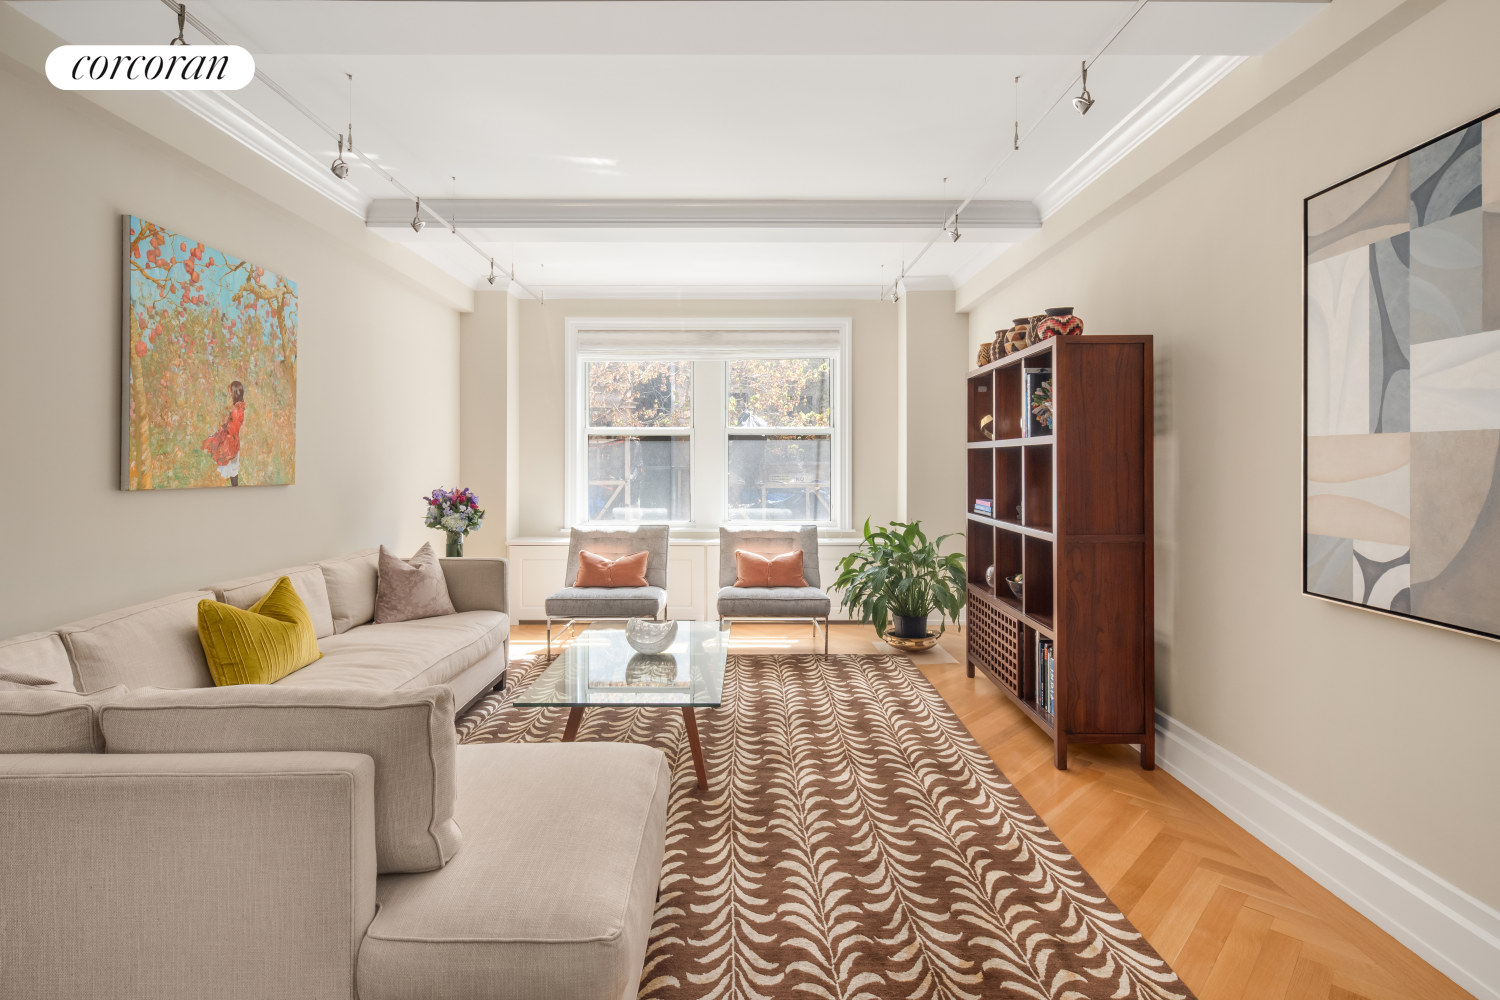 845 West End Avenue 2E, Upper West Side, Upper West Side, NYC - 4 Bedrooms  
3 Bathrooms  
7 Rooms - 